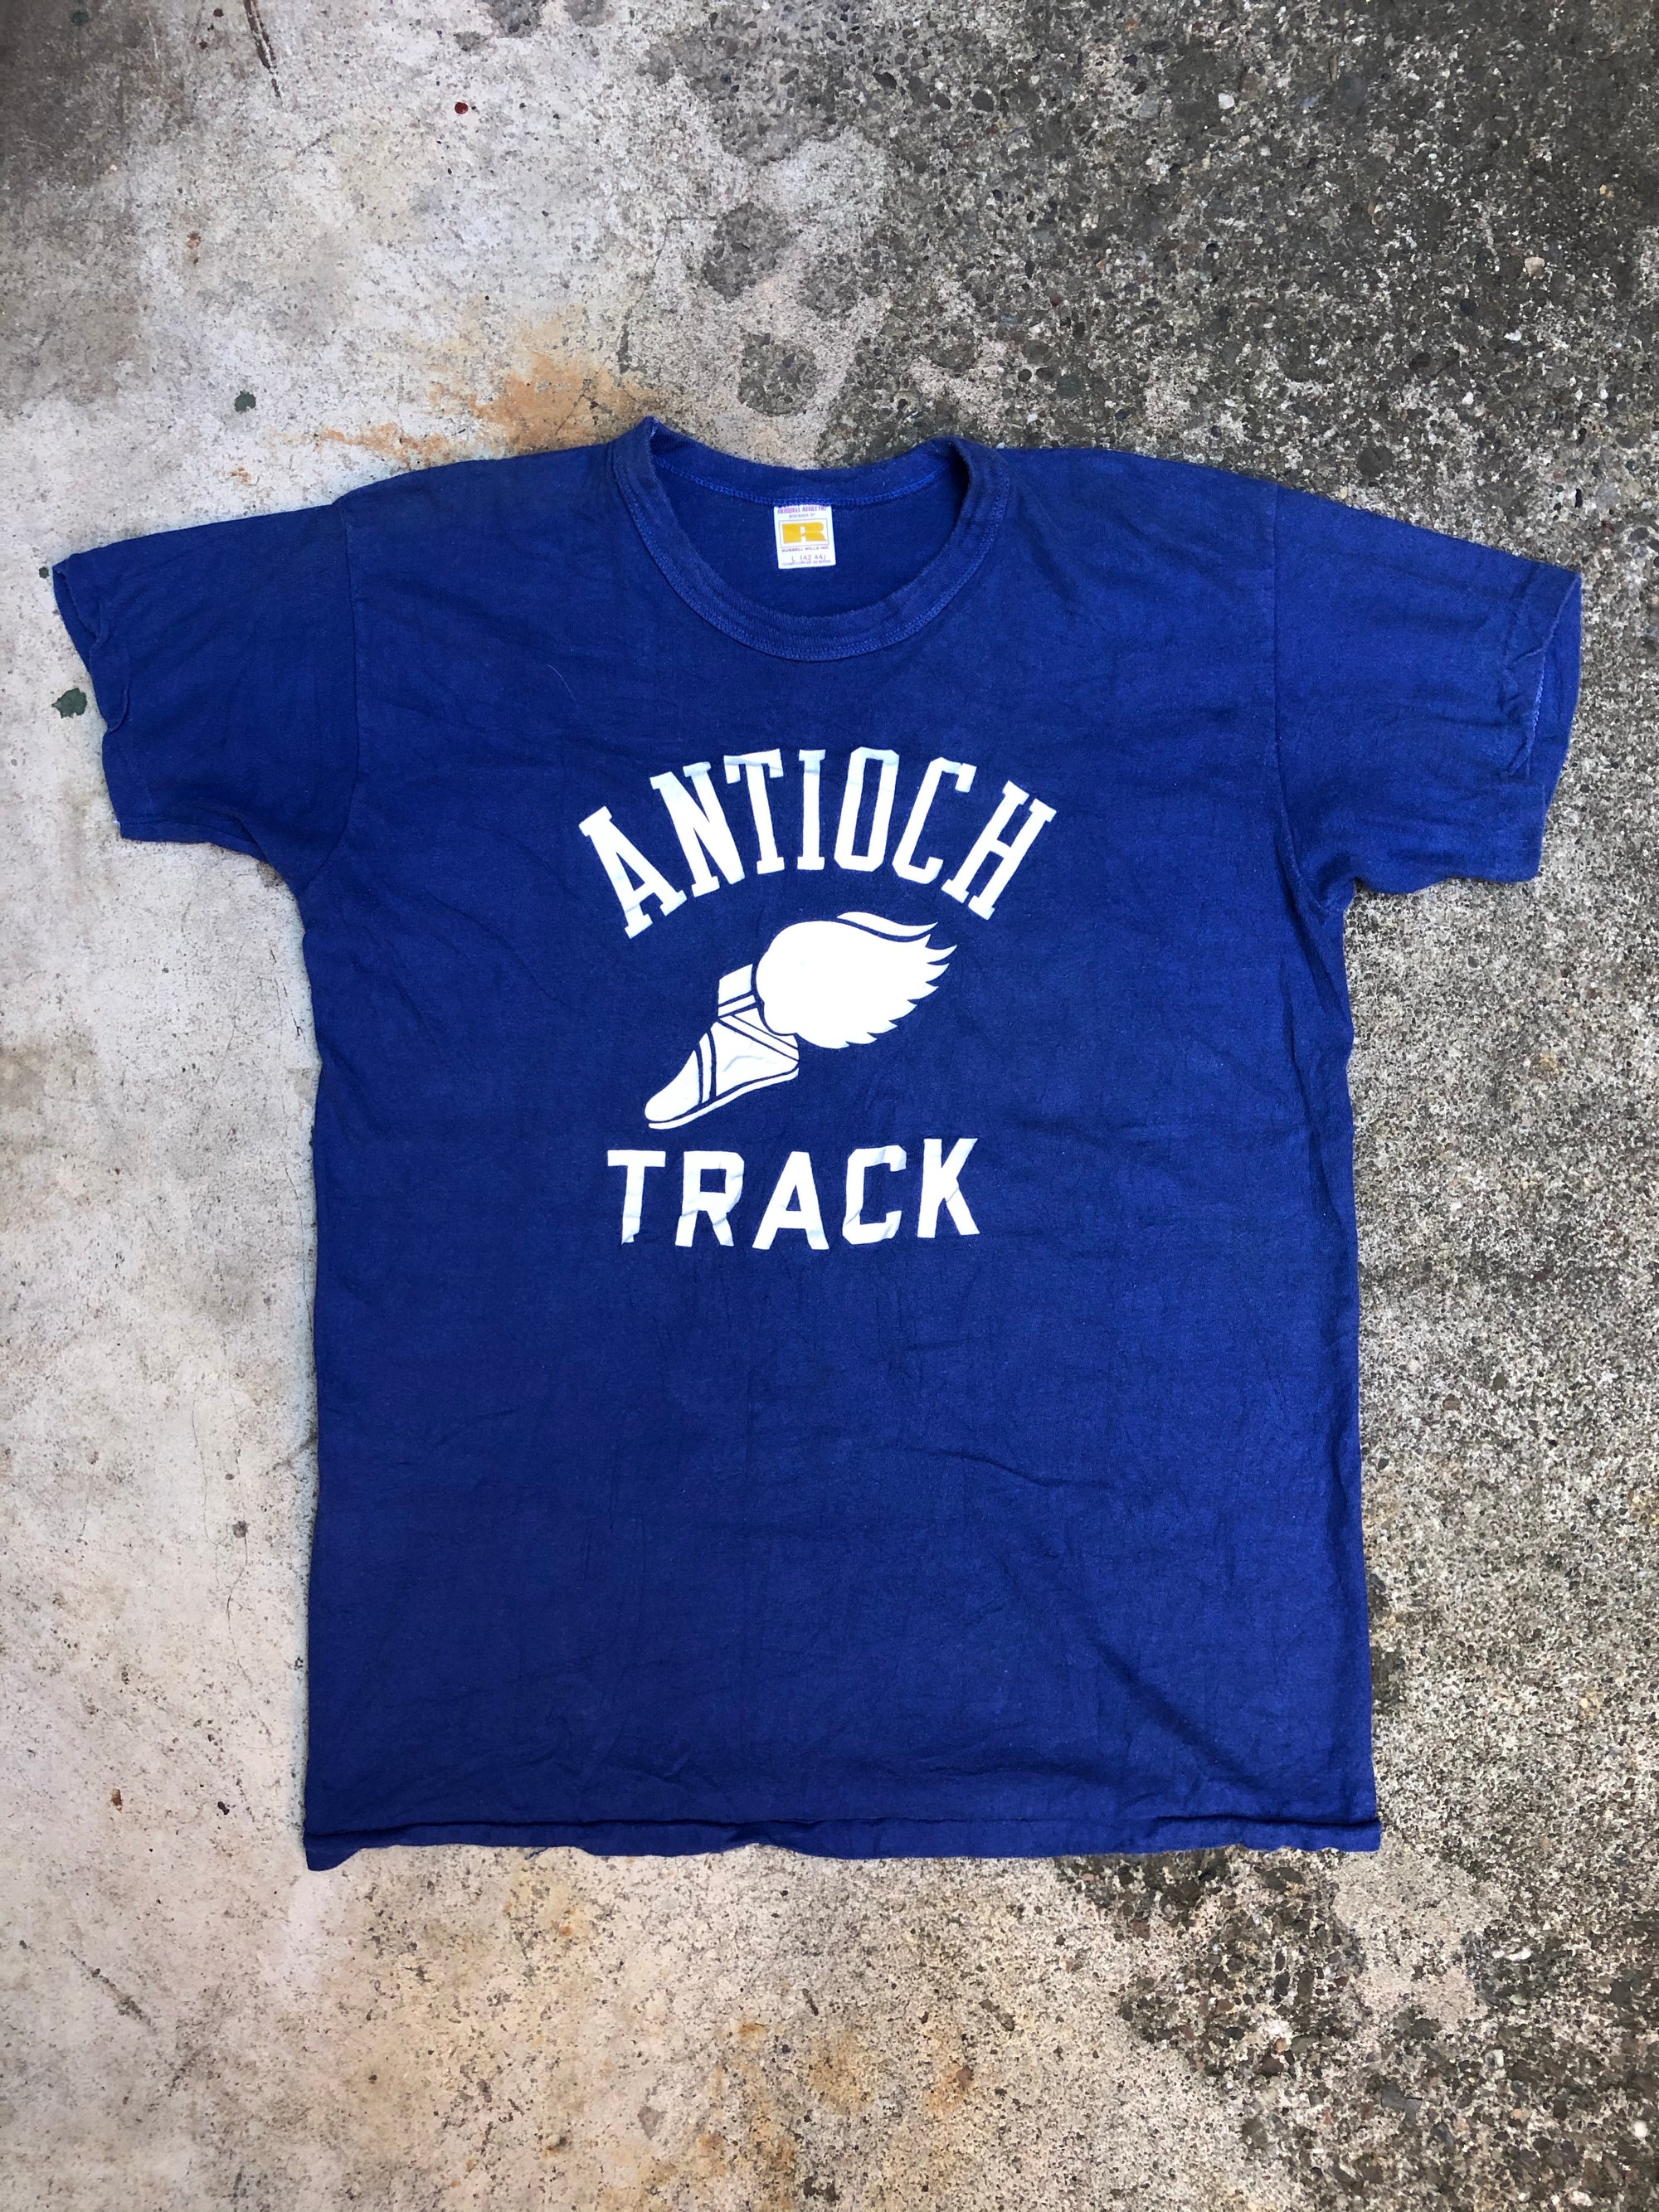 1970s Russell Single Stitched “Antioch Track” Tee